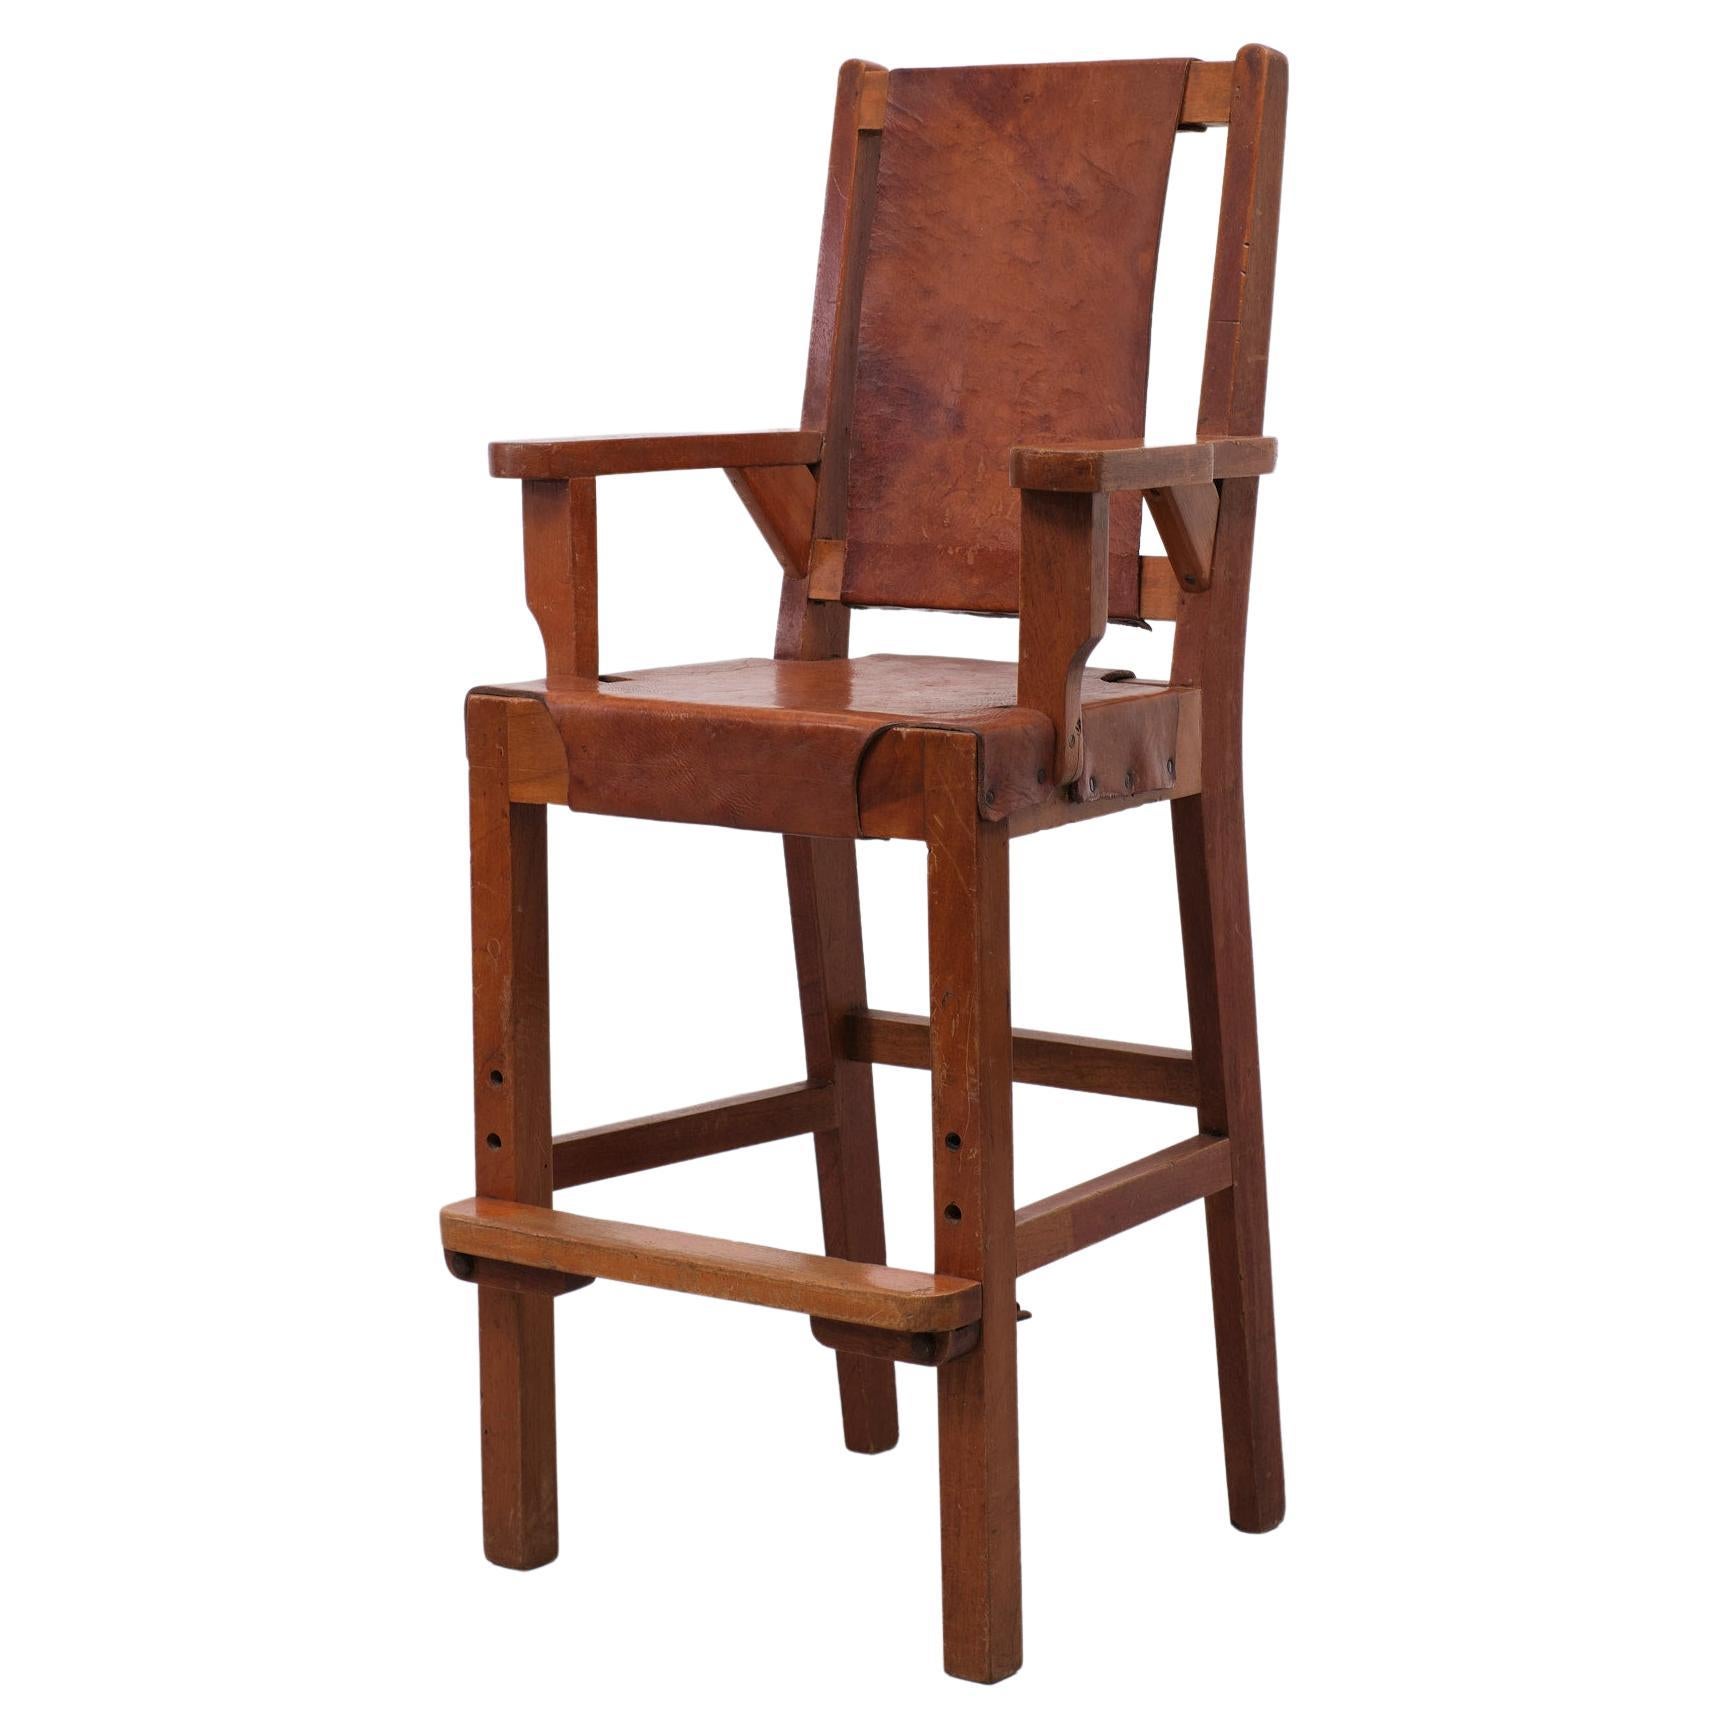 Unique handmade High chair, wooden frame, comes with Saddle Leather upholstery. In a Cognac color. Aadjustable feet rest Great looking piece. Gerrit Rietveld in style.